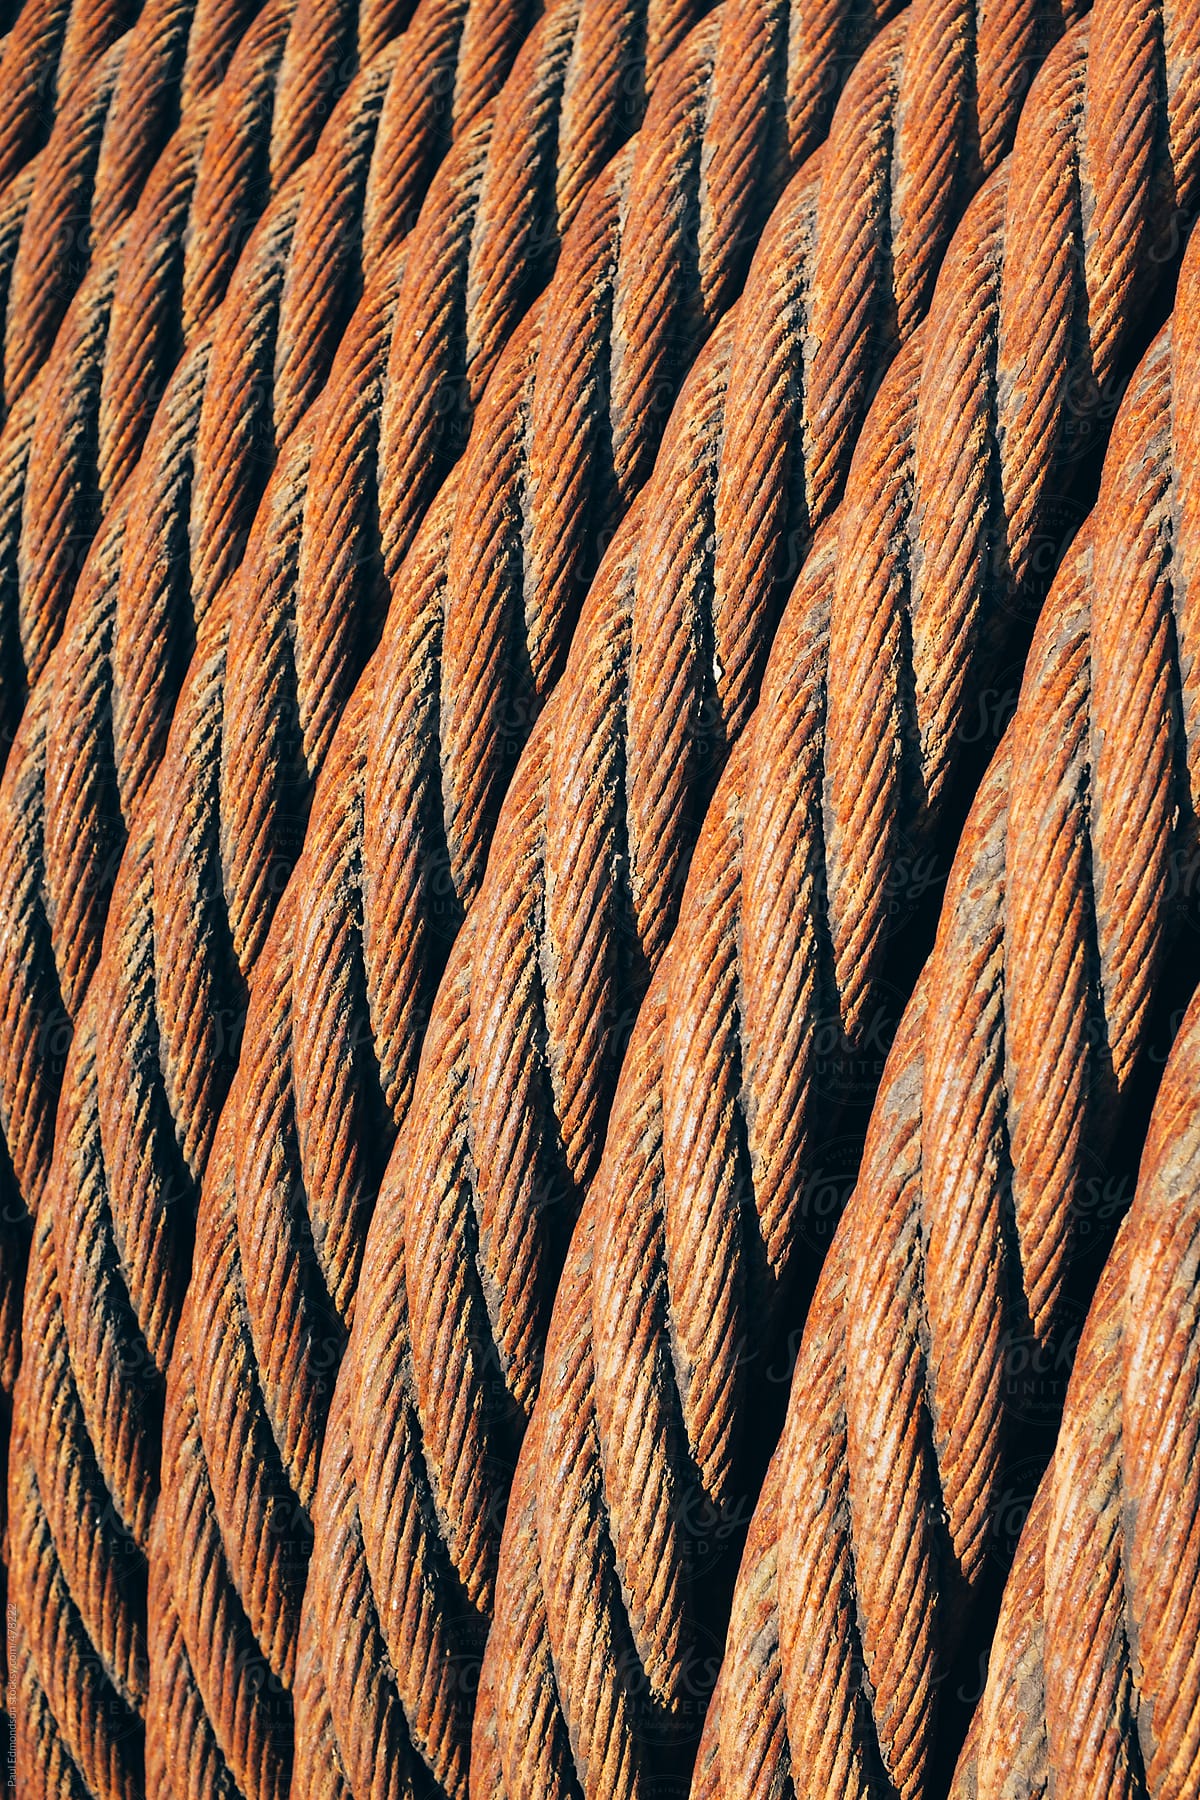 Close up rusty, metal cables used for commercial fishing